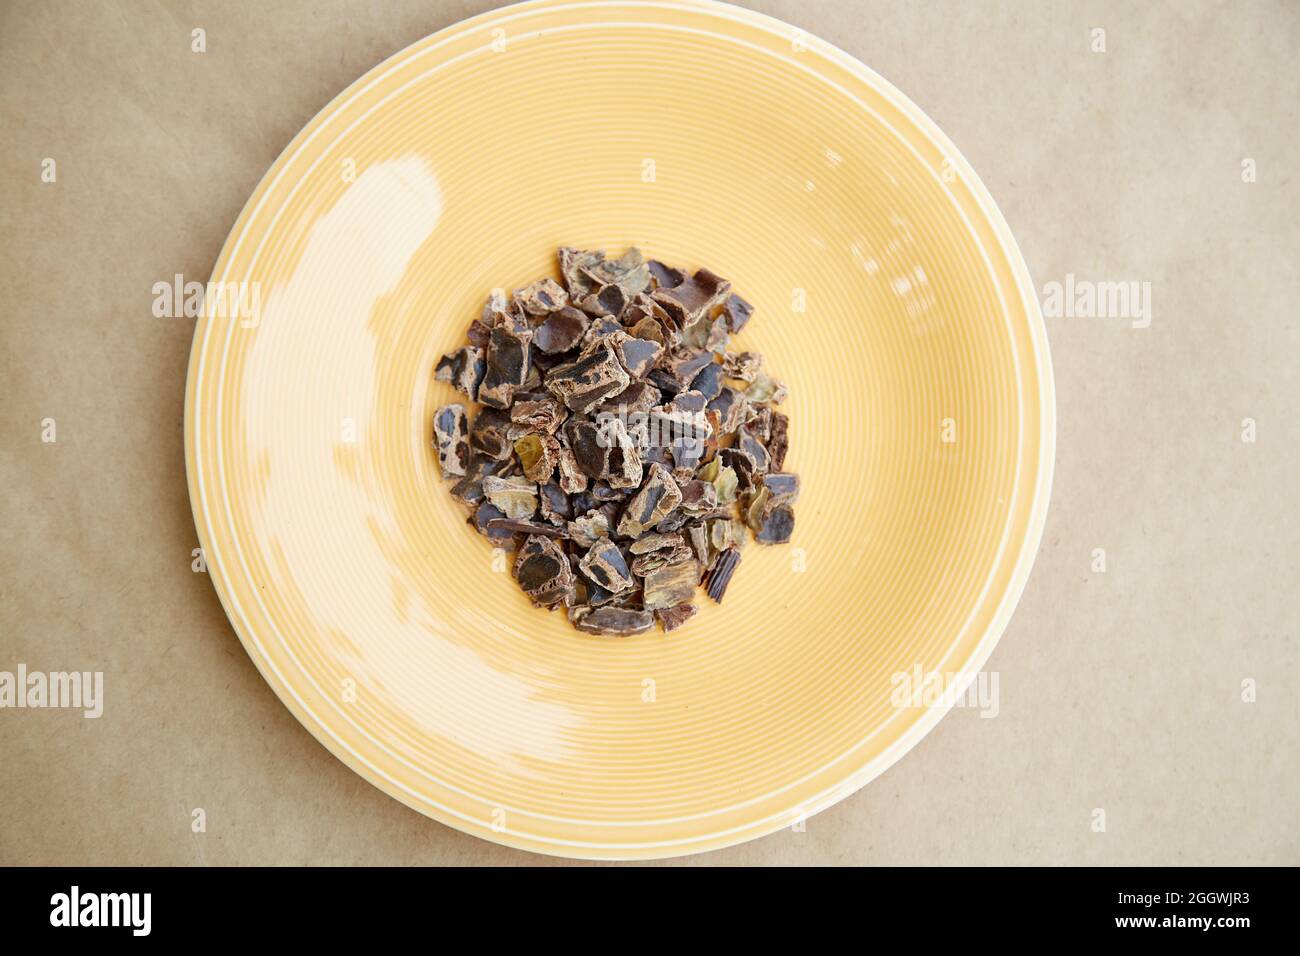 Carob - plant-based alternative - natural product on the plate. Organic antioxidants and protein. Top view. High quality photo Stock Photo